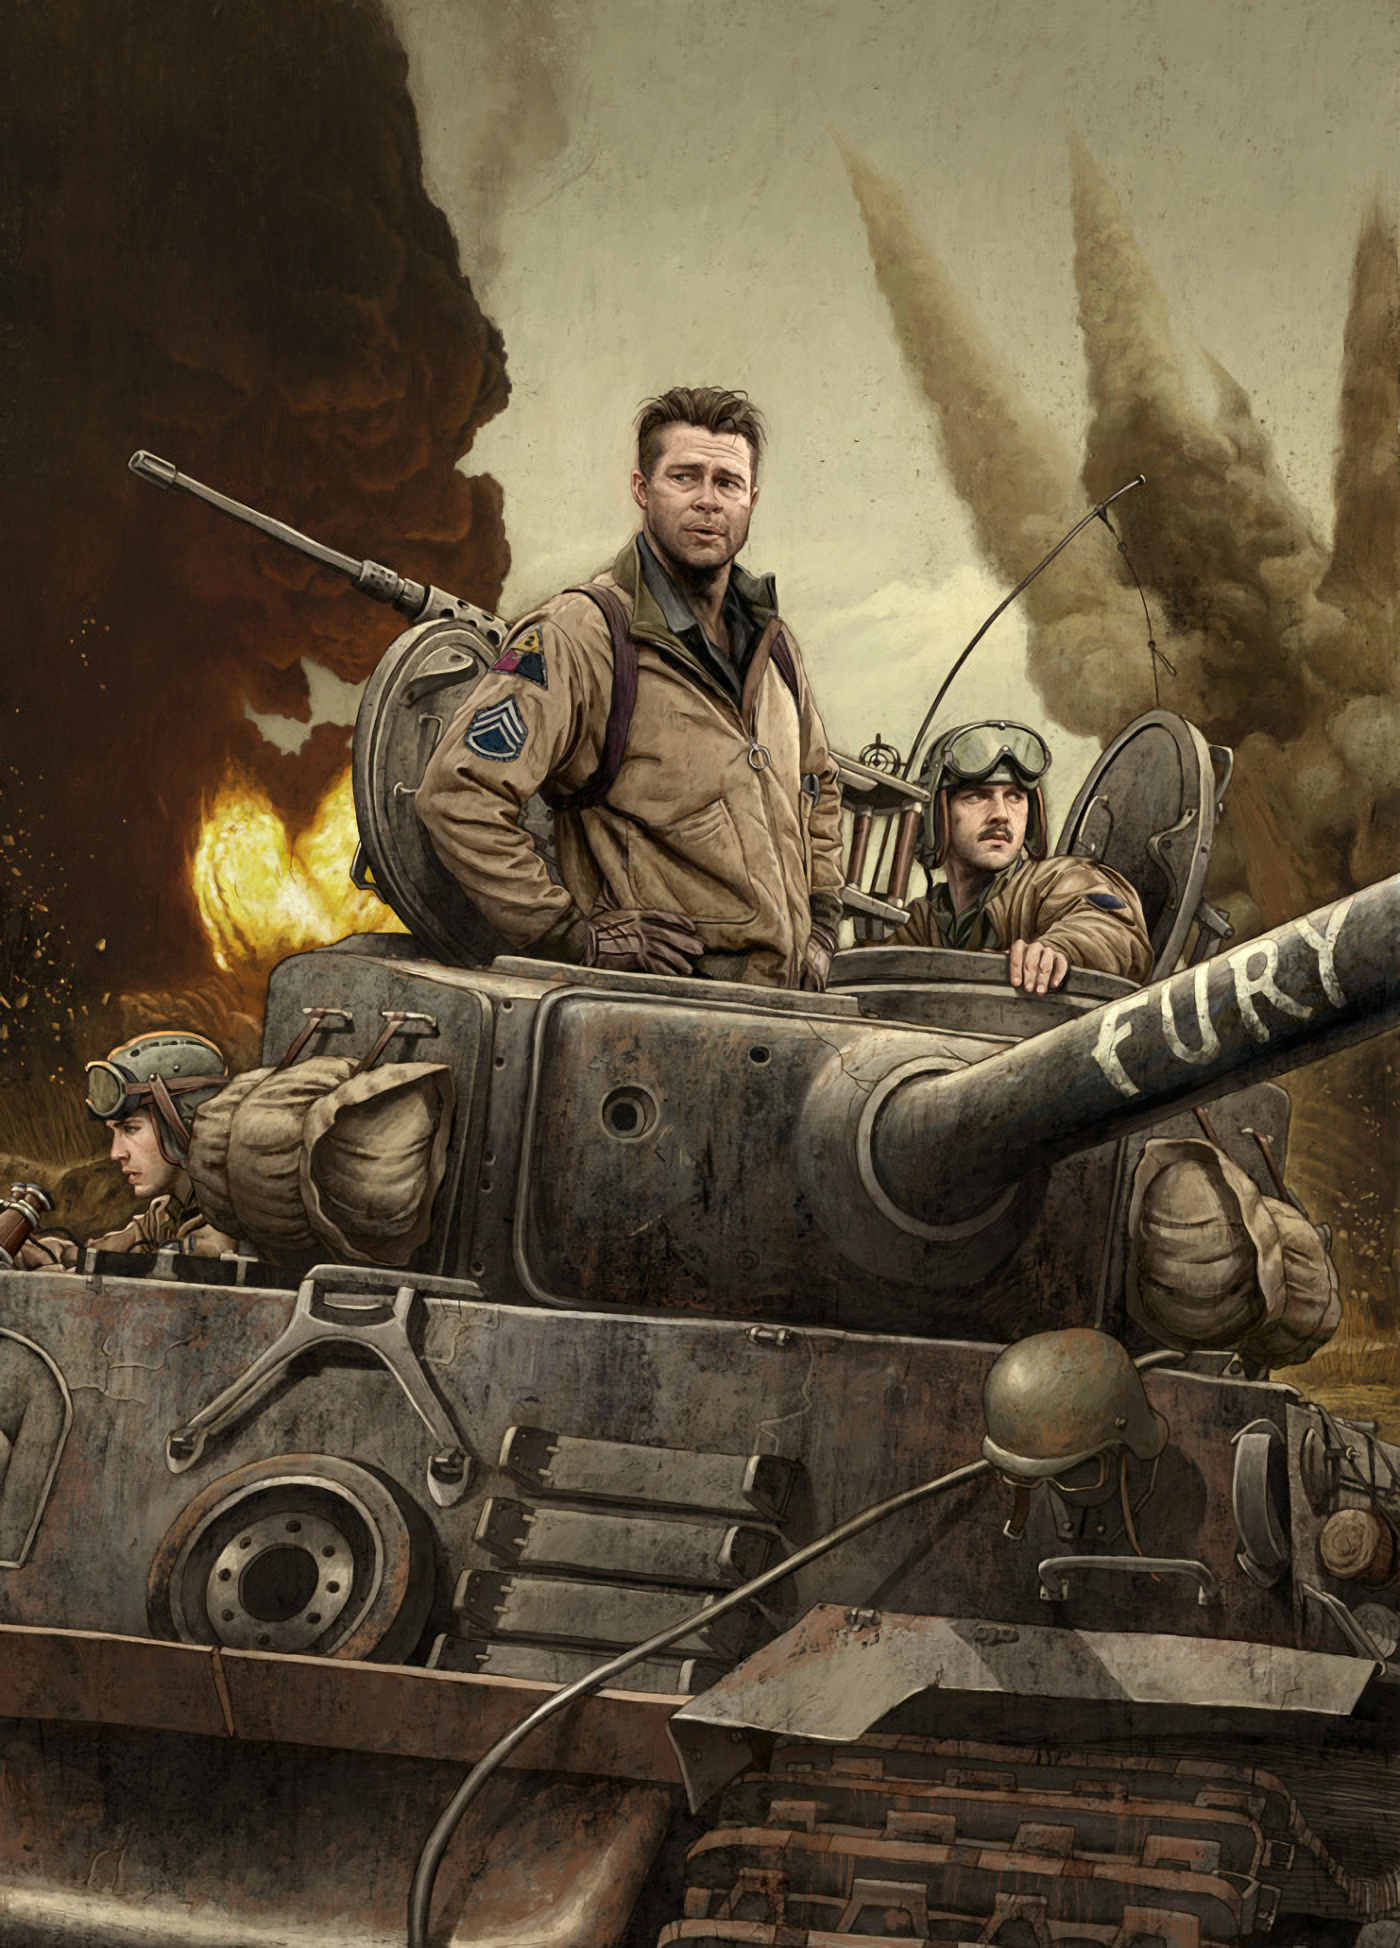 Fury (2014) HD Wallpaper From Gallsource.com (con imágenes